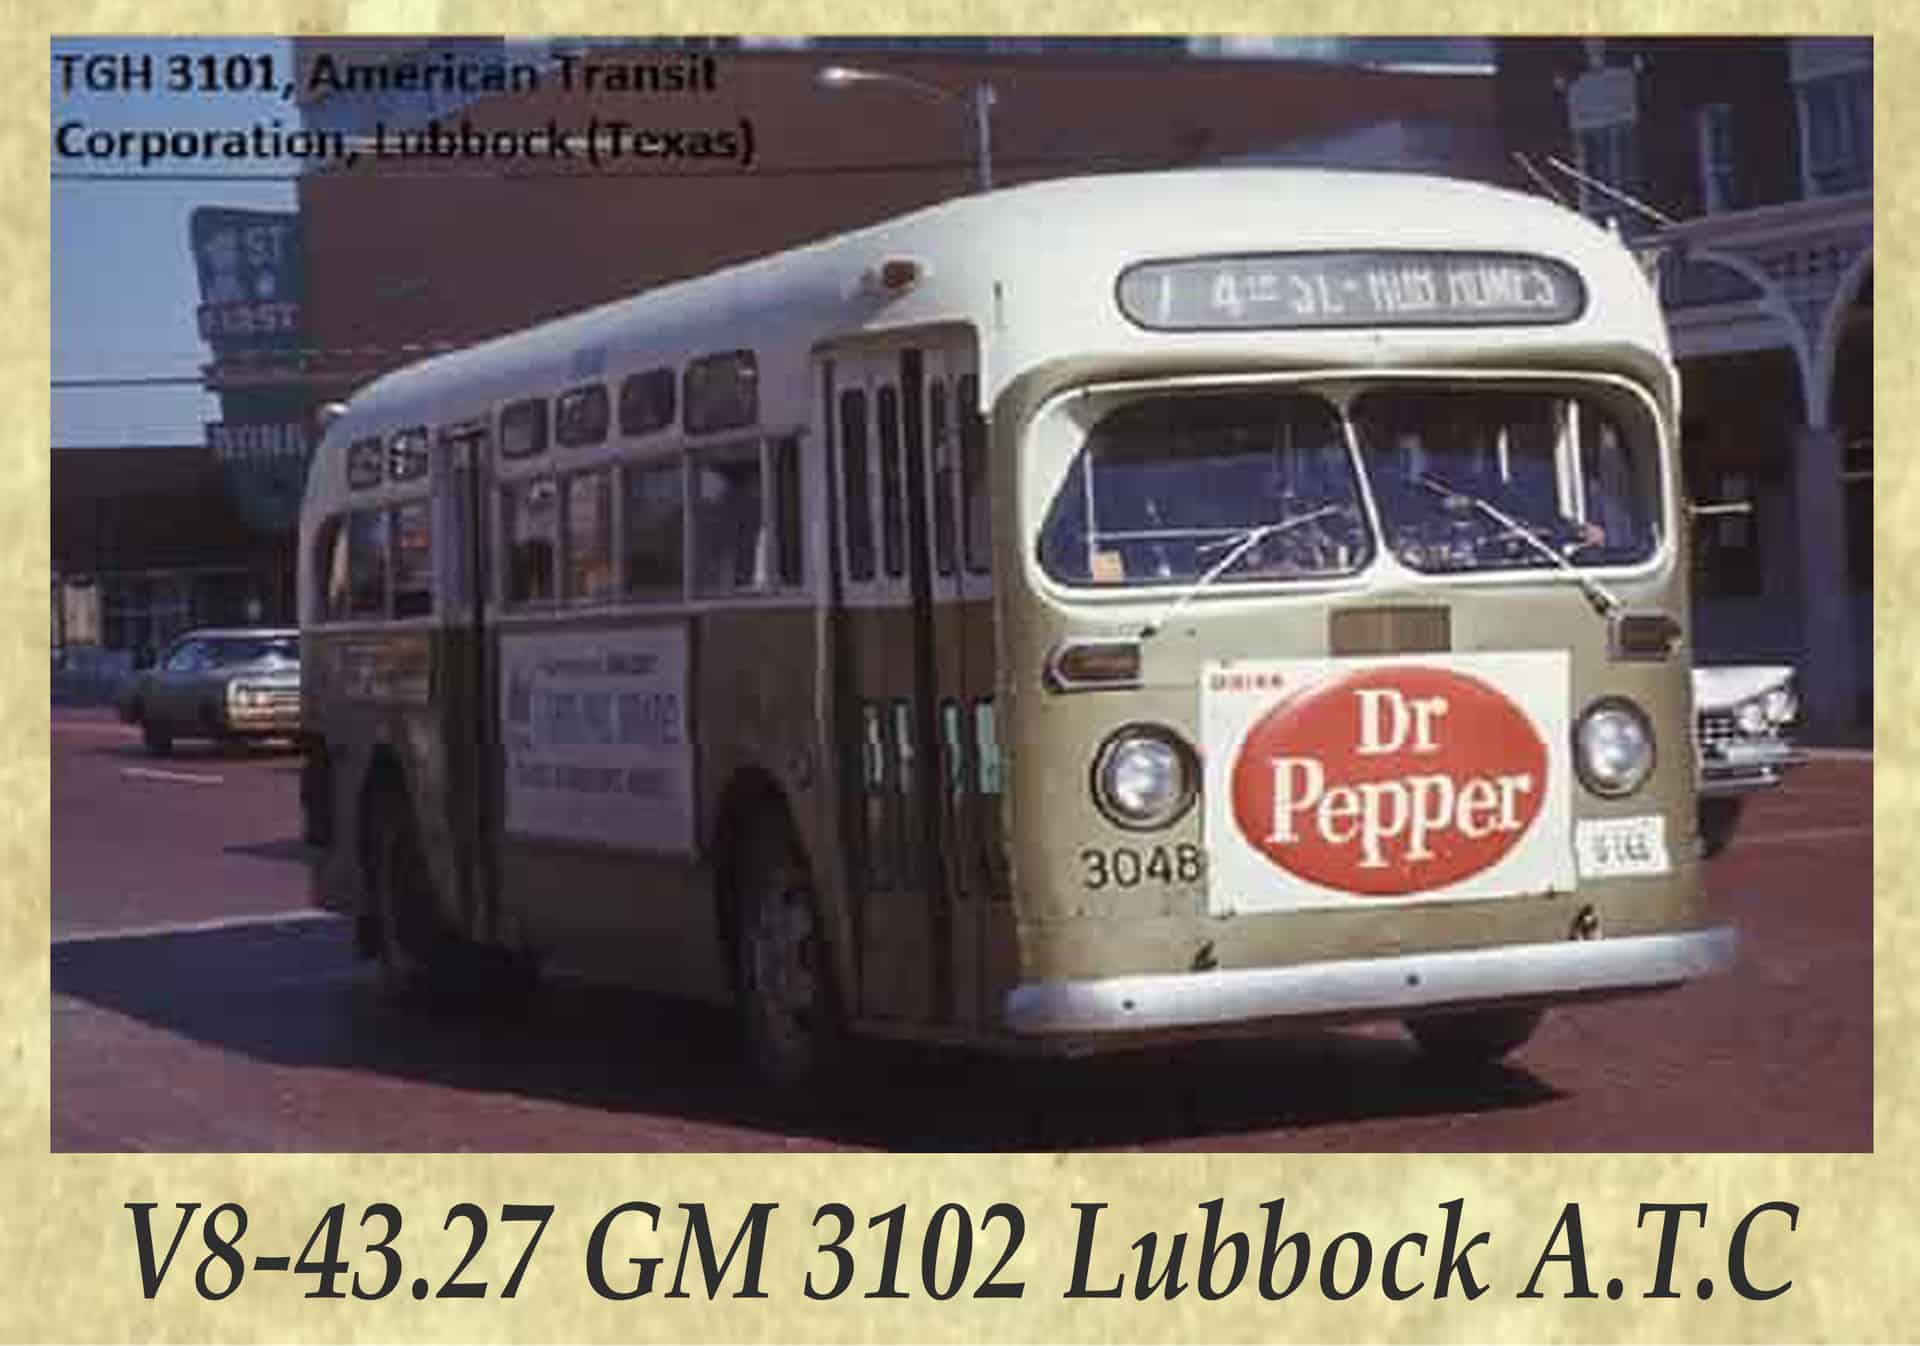 V8-43.27 GM 3102 Lubbock A.T